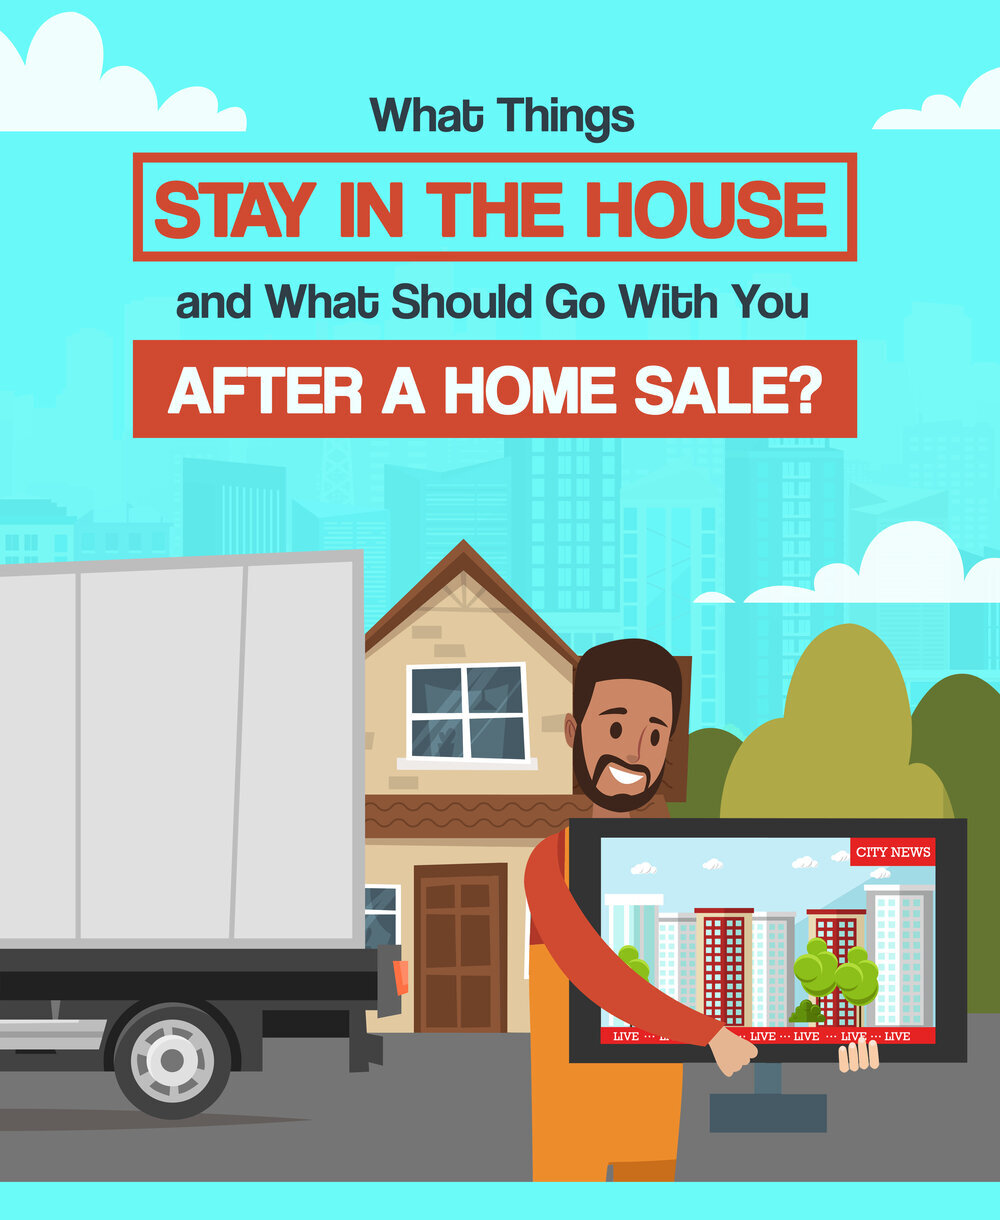 What Things Stay in the House and What Should Go With You After A Home Sale?